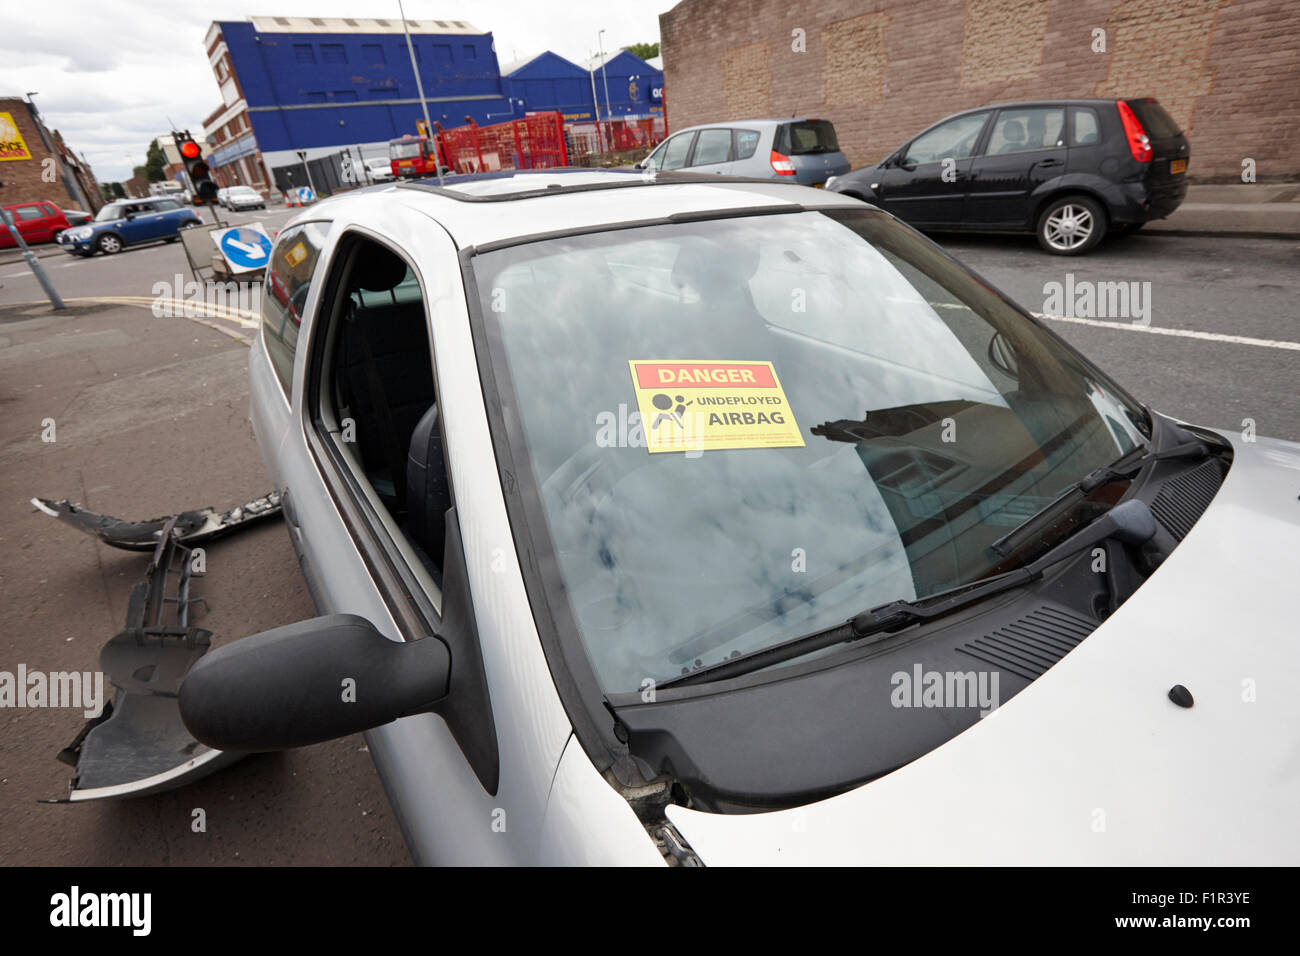 danger undeployed airbag warning sticker on the windscreen of a car involved in an accident Birmingham UK Stock Photo